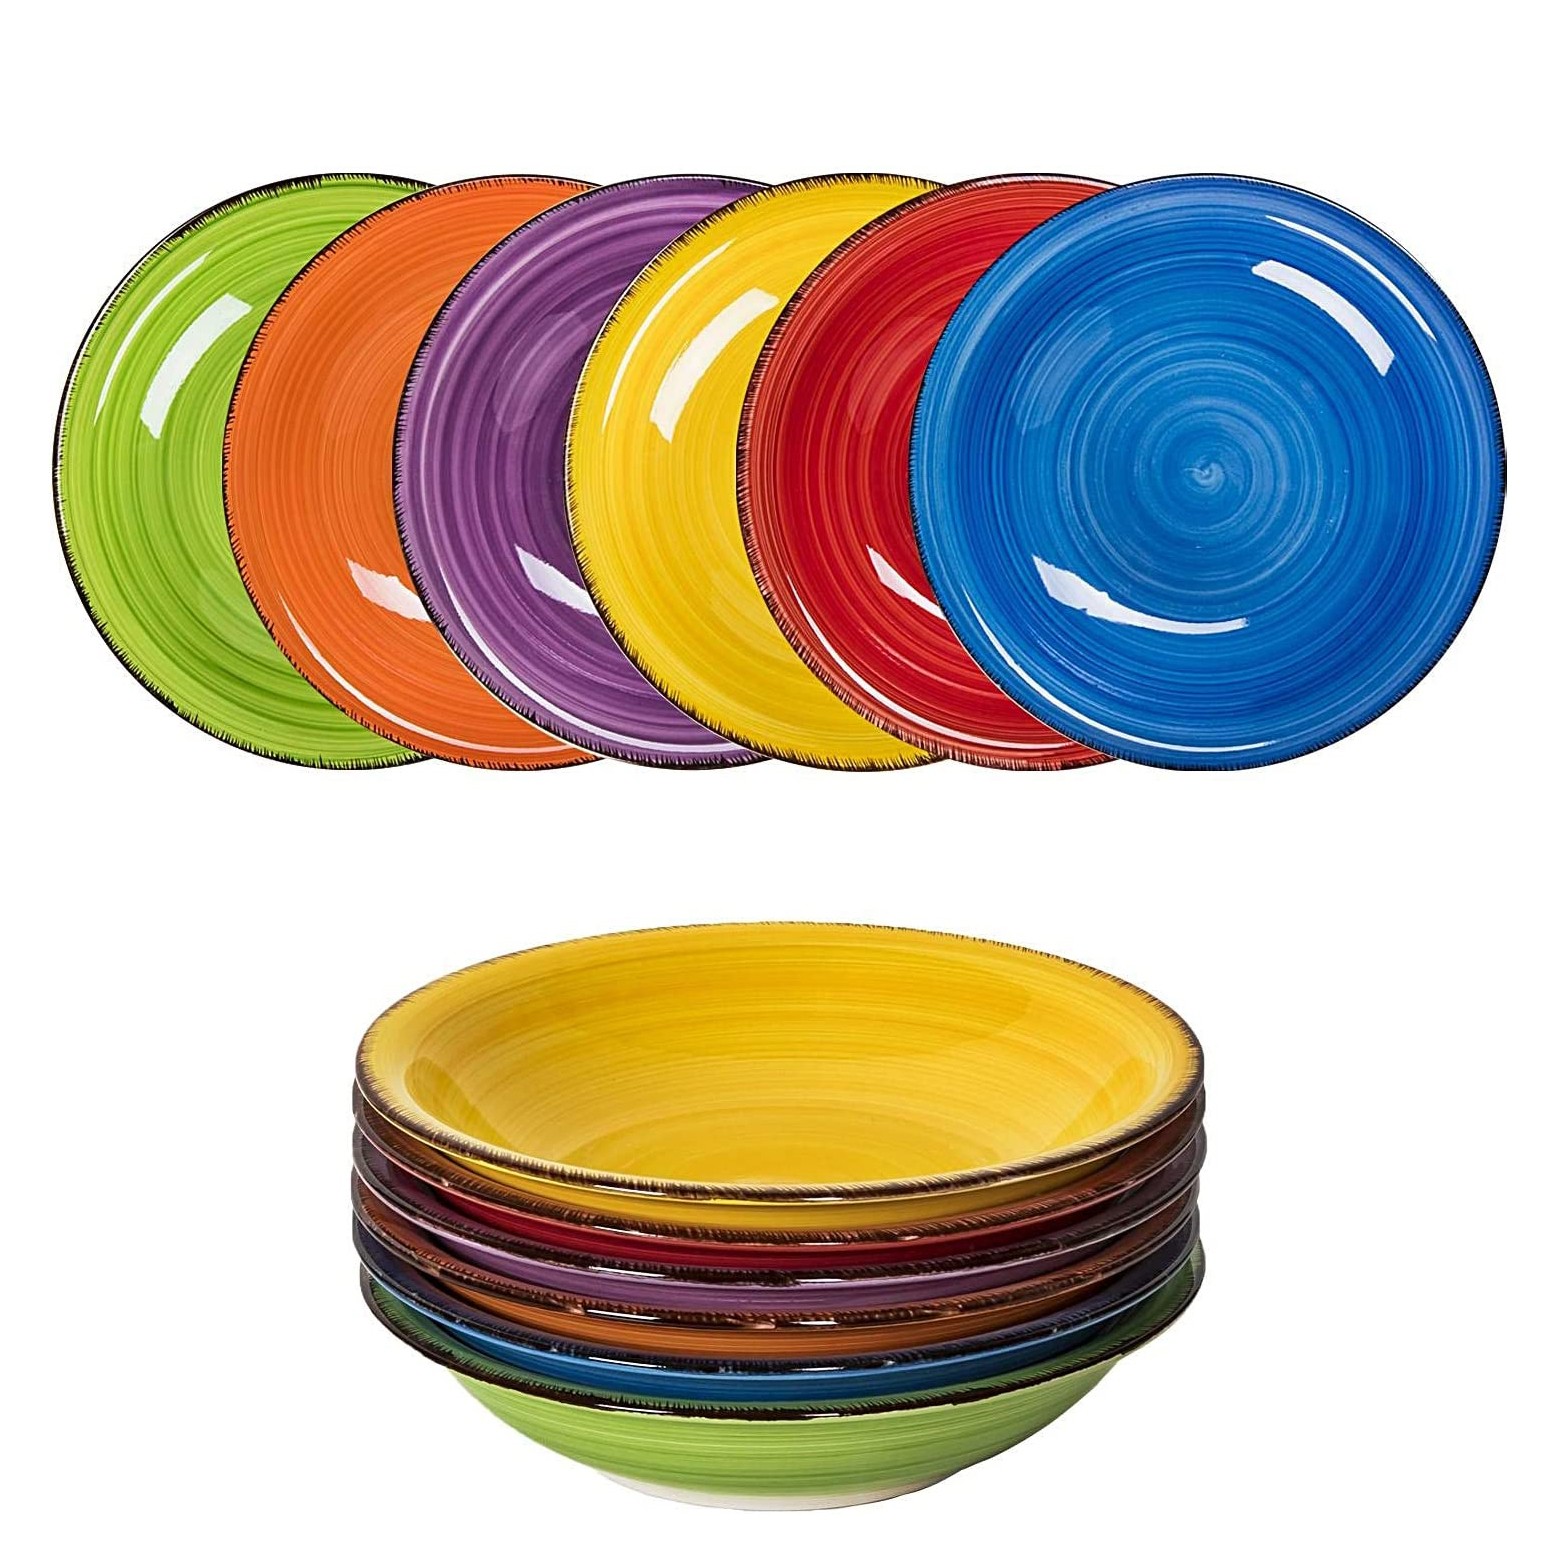 Hand painted stoneware tableware set with various colors and shapes